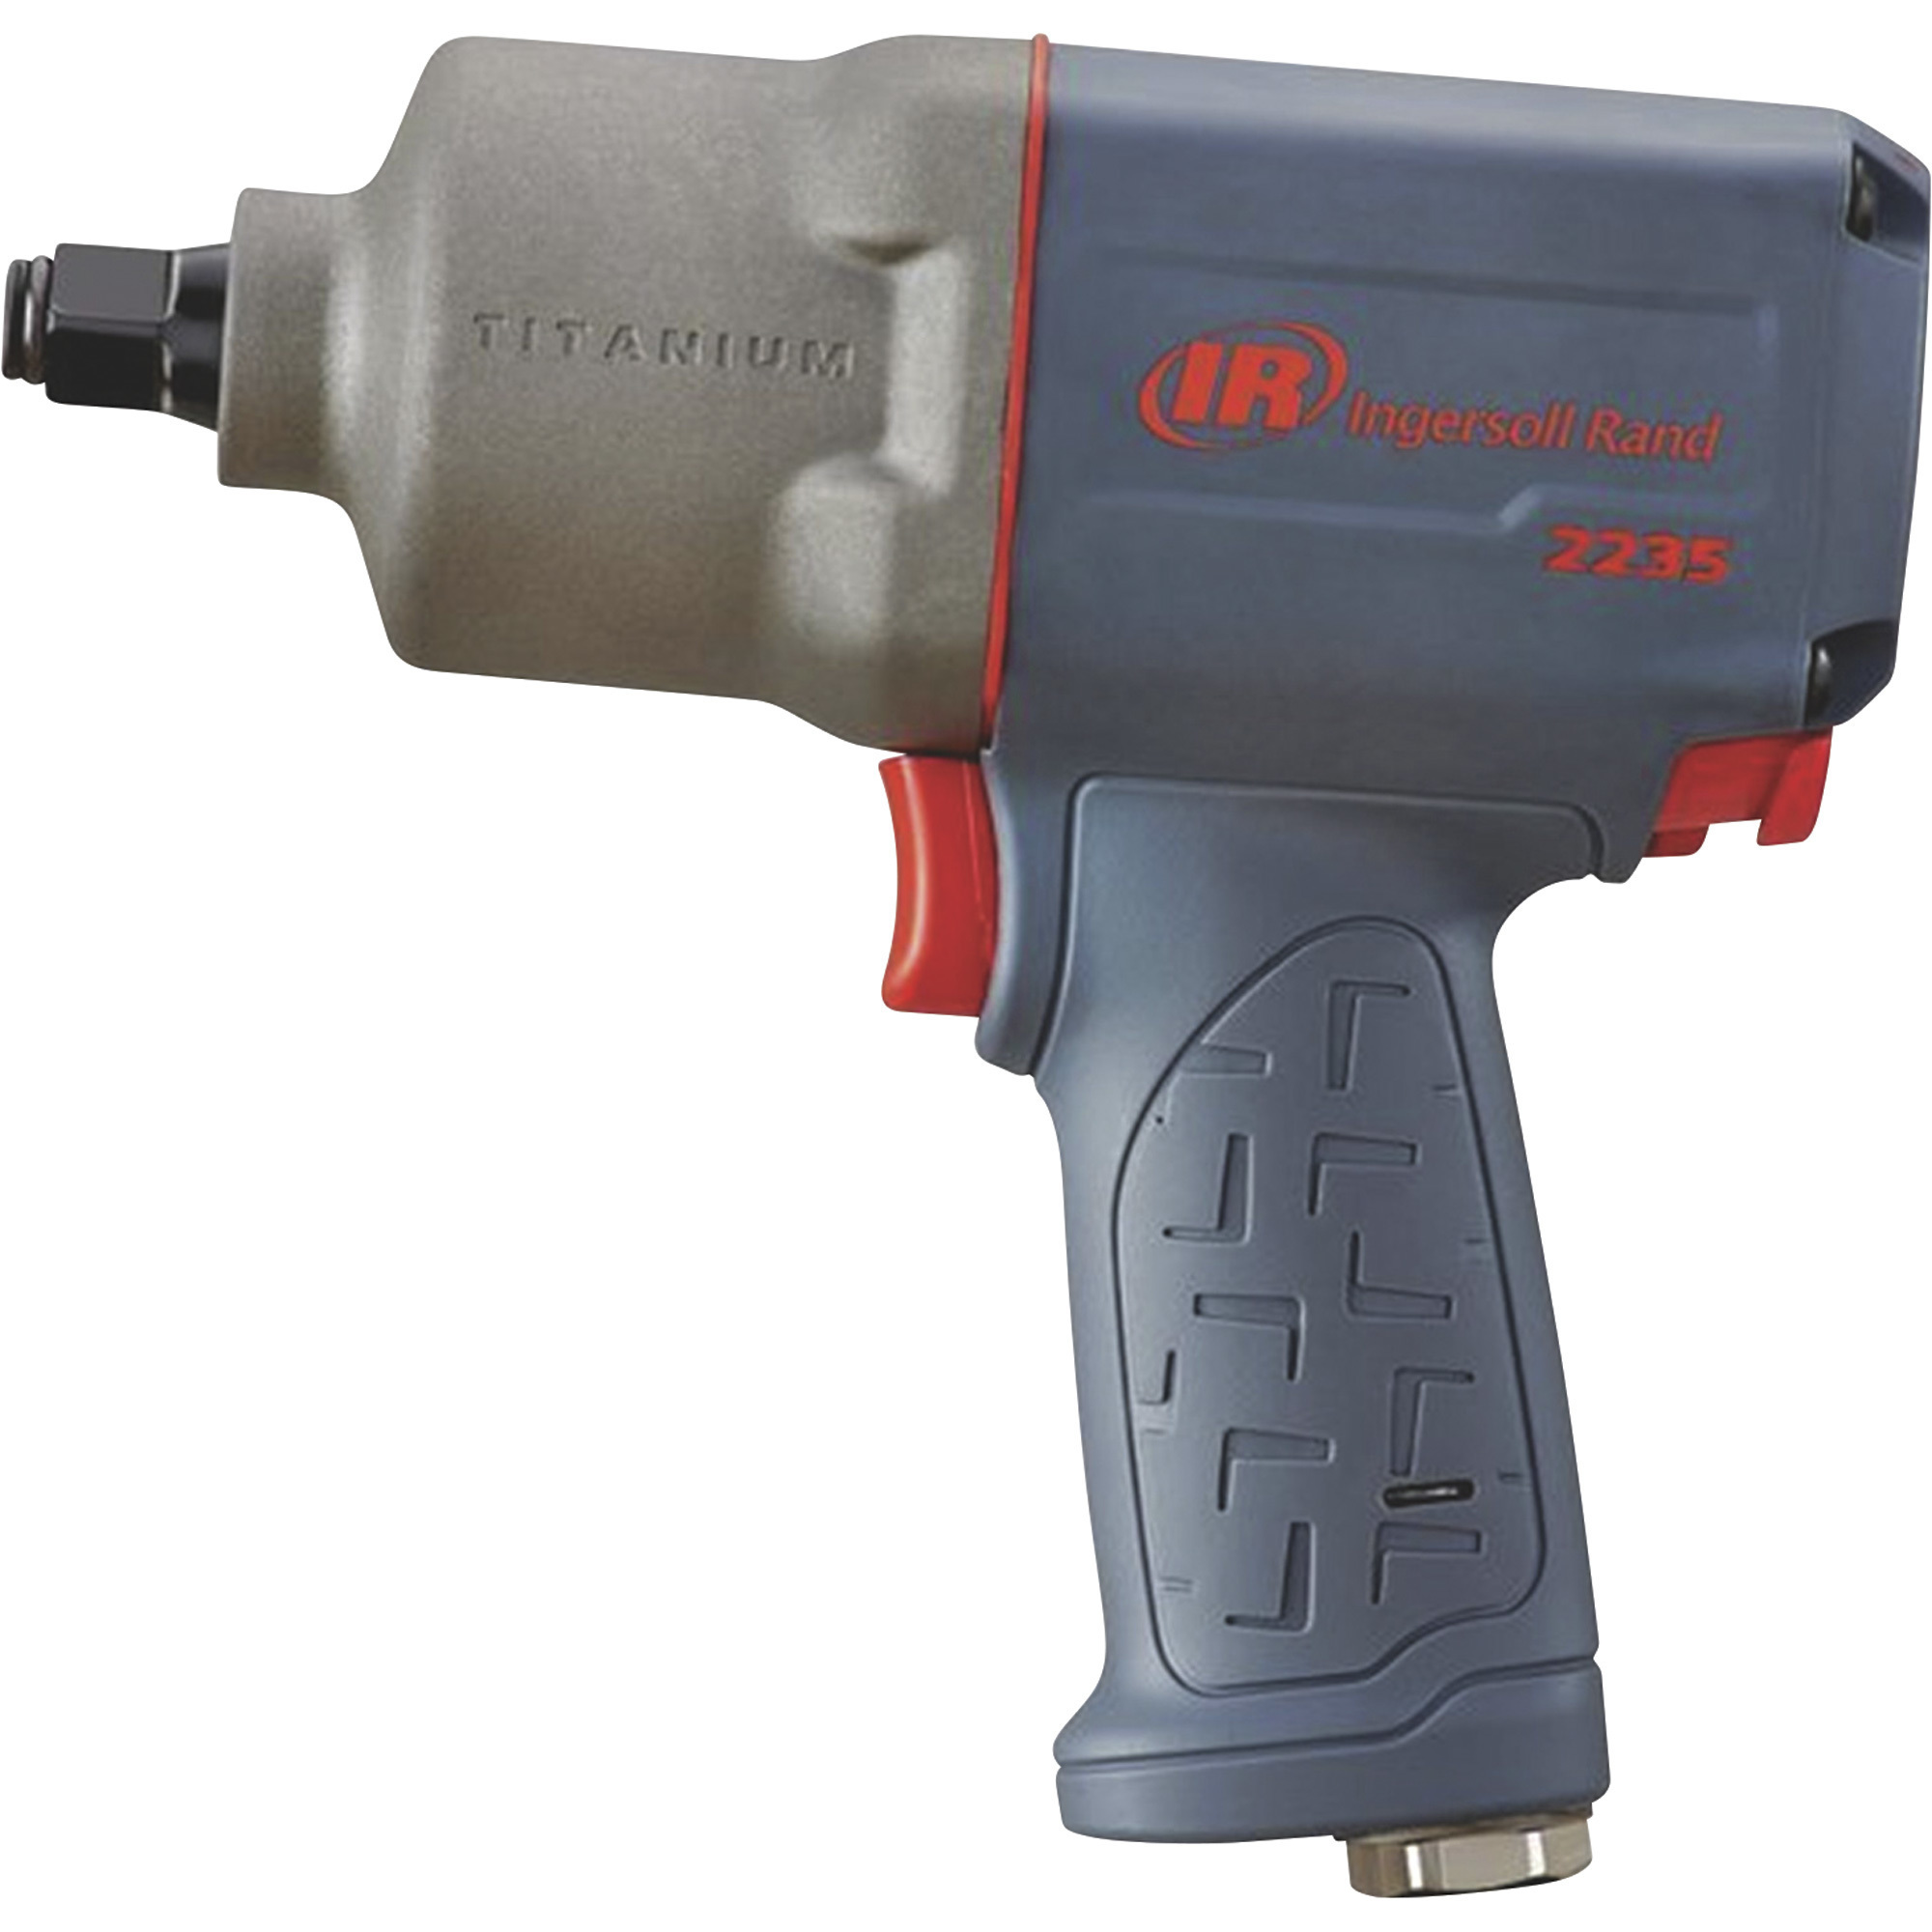 Ingersoll Rand Air Impact Wrench, 1/2Inch Drive, 6 CFM, 1350 Ft./Lbs. Max Torque, Model 2235TiMax